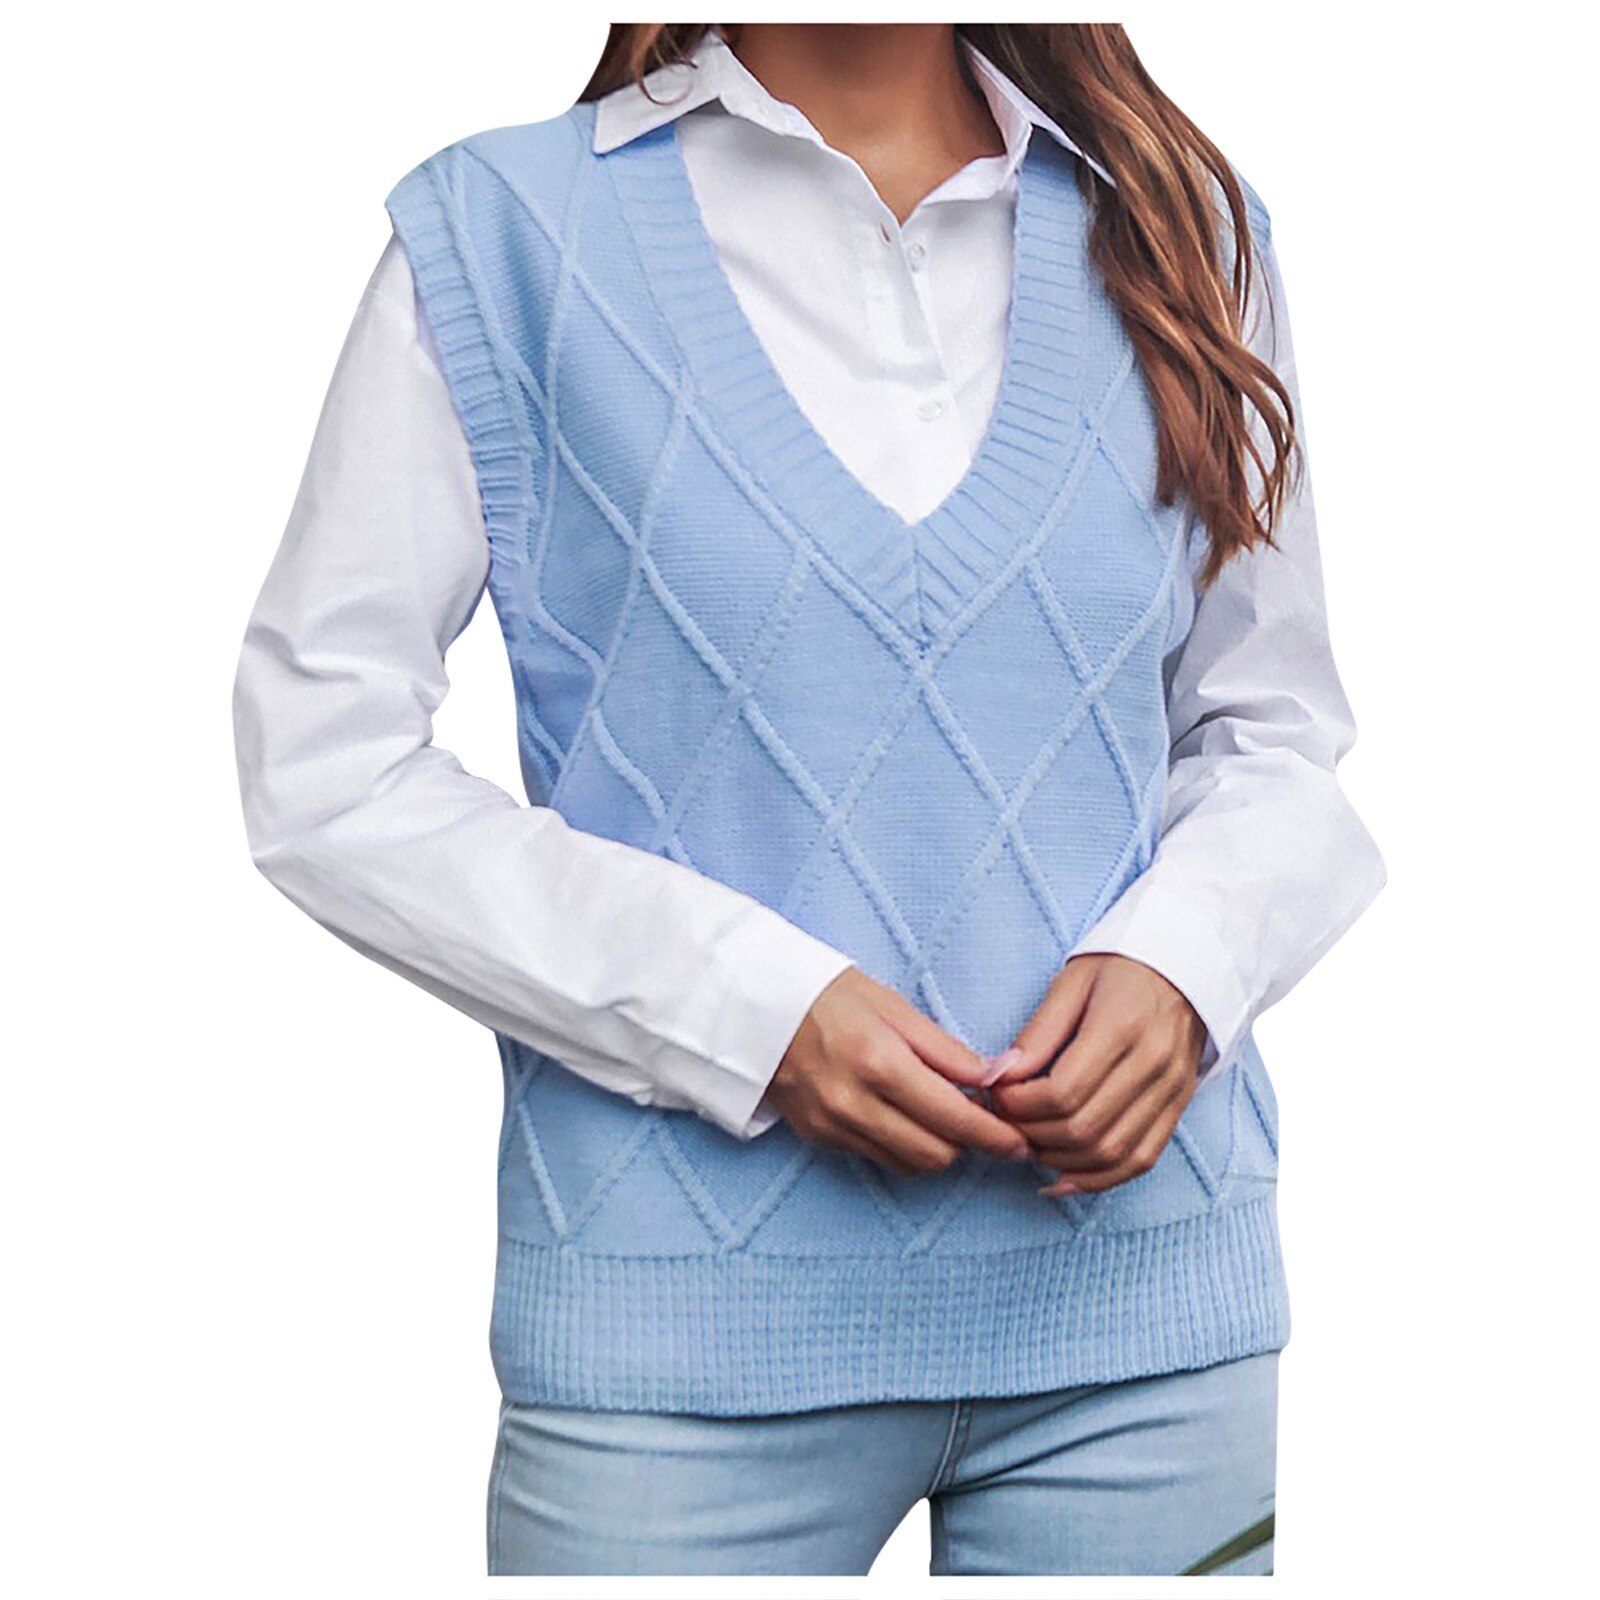 Women's Casual Solid Color Sleeveless Sweater Vest